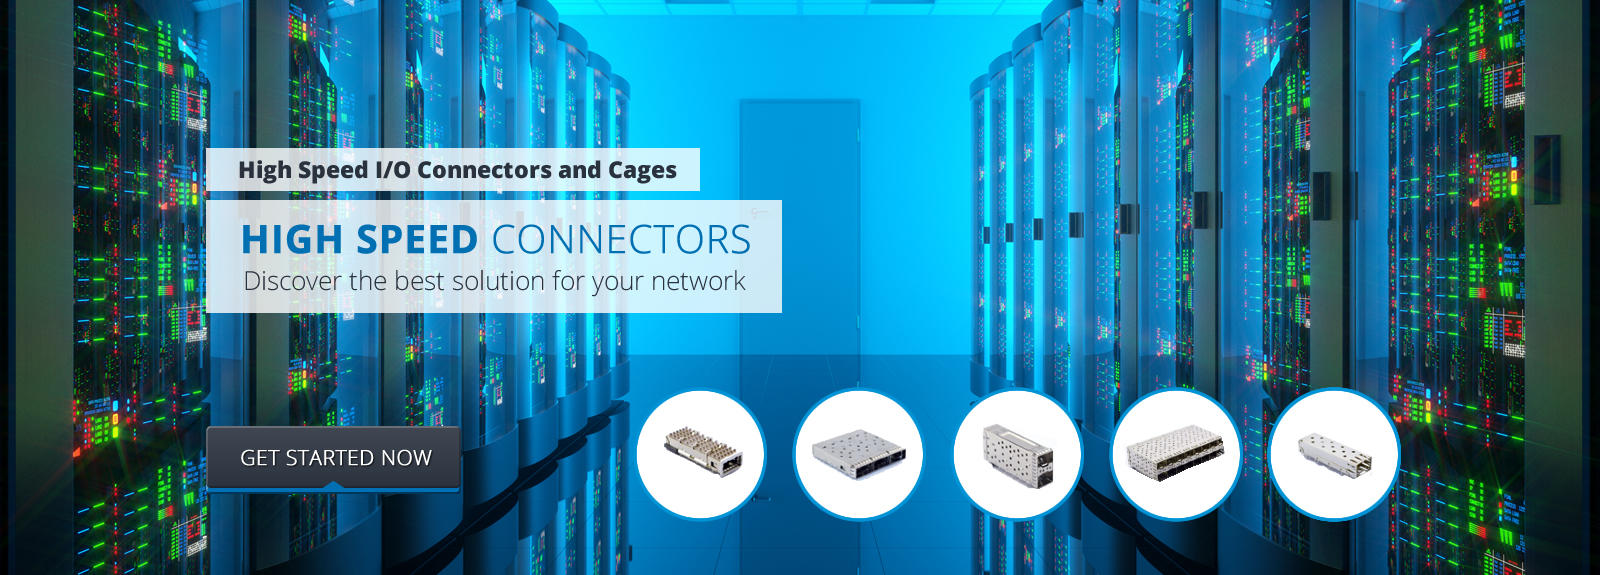 High speed I/O SFP connectors and cages - AICO